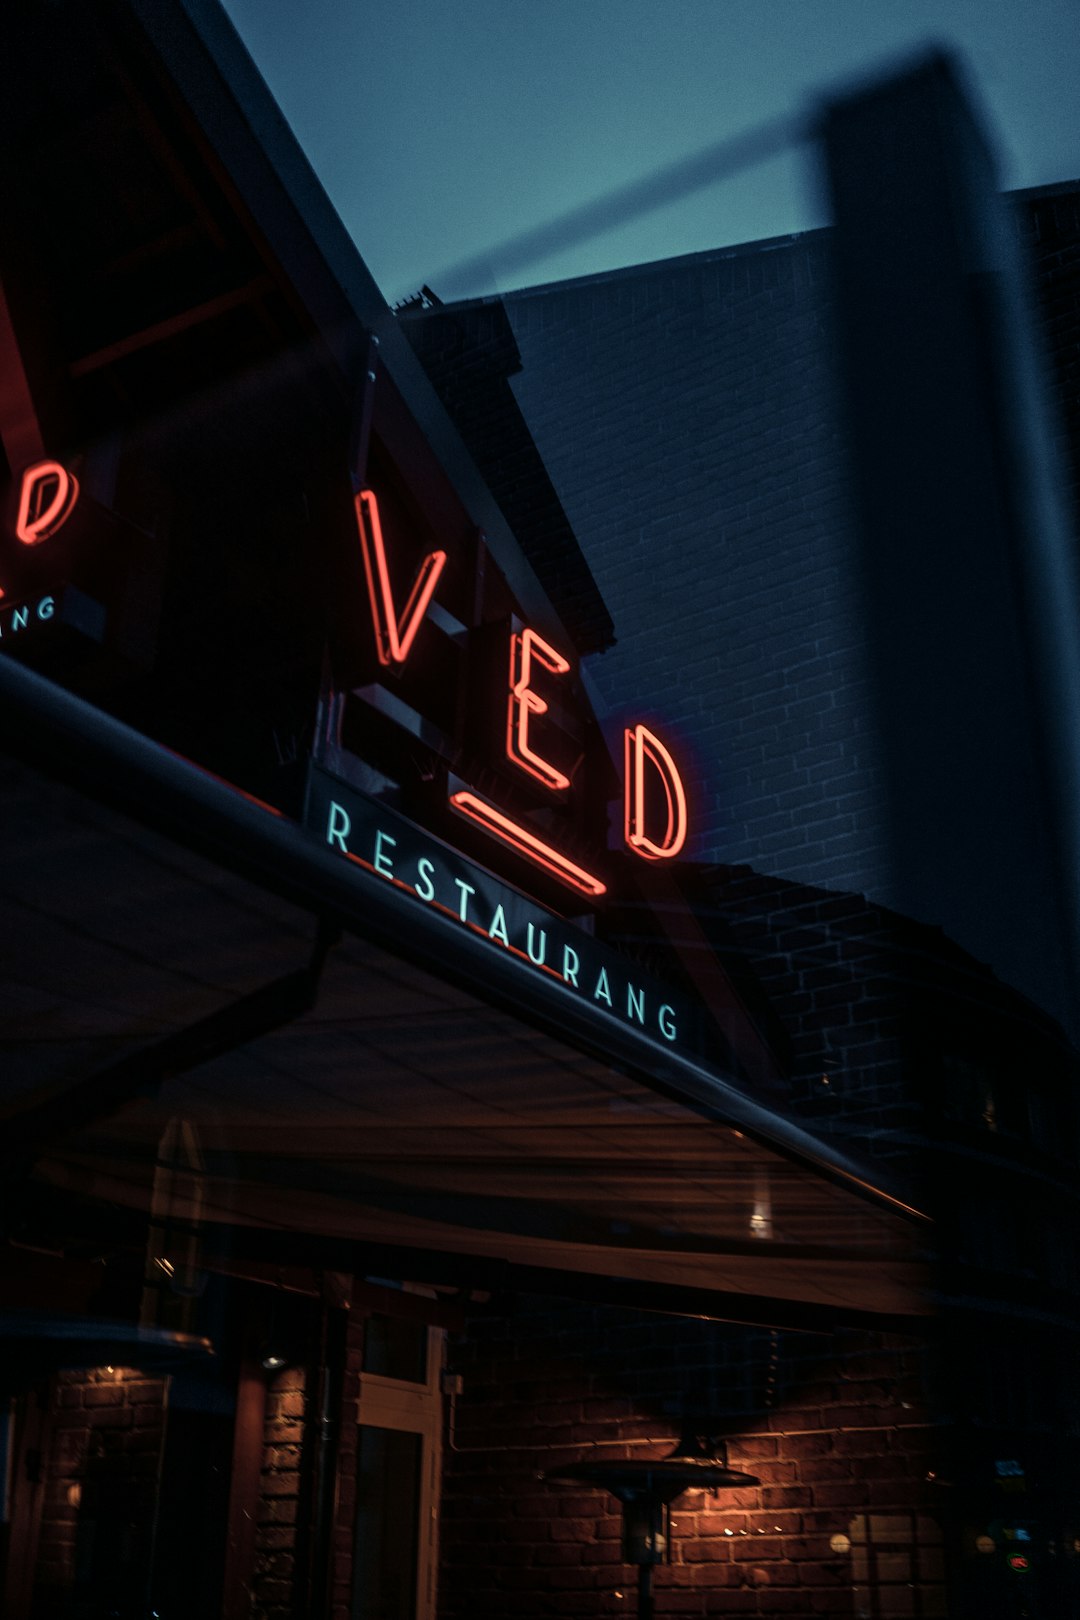 Ved signage at night